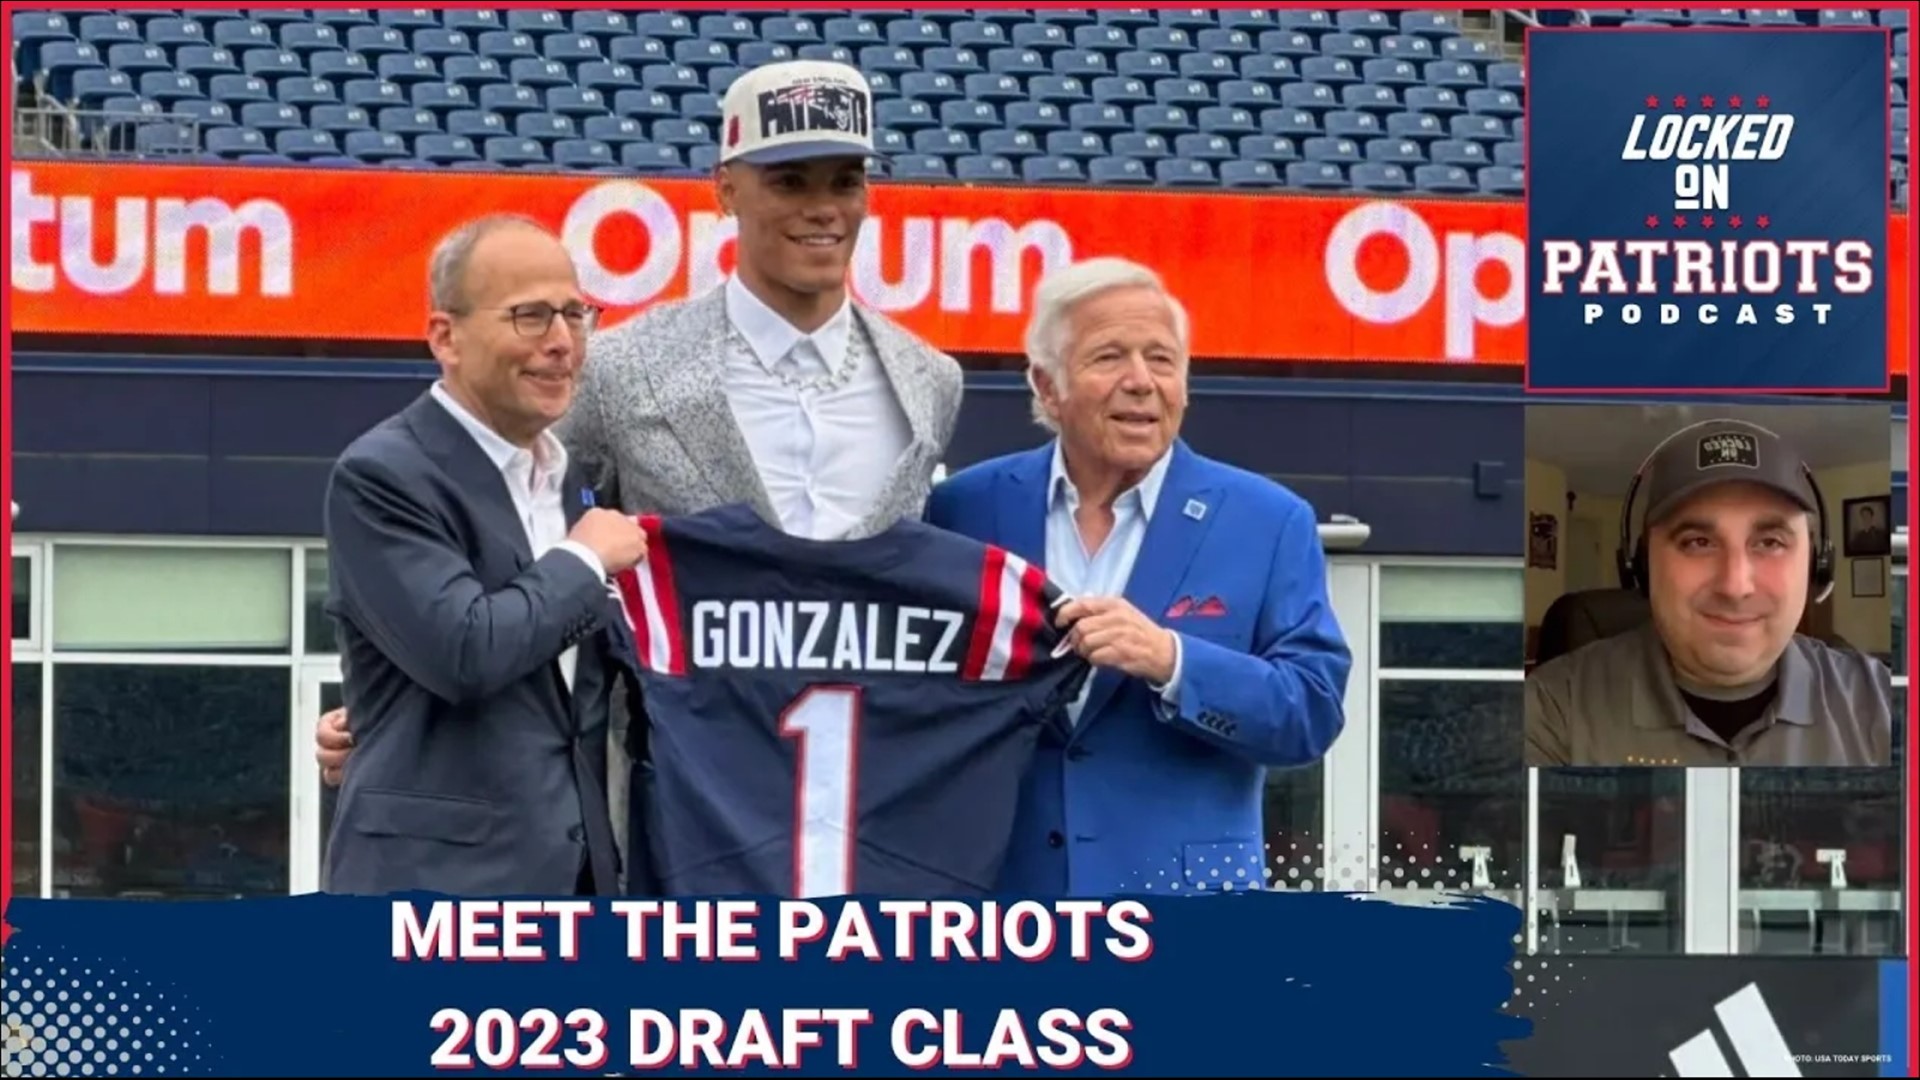 For the first time since 2010, the New England Patriots made 12 selections in the 2023 NFL Draft.